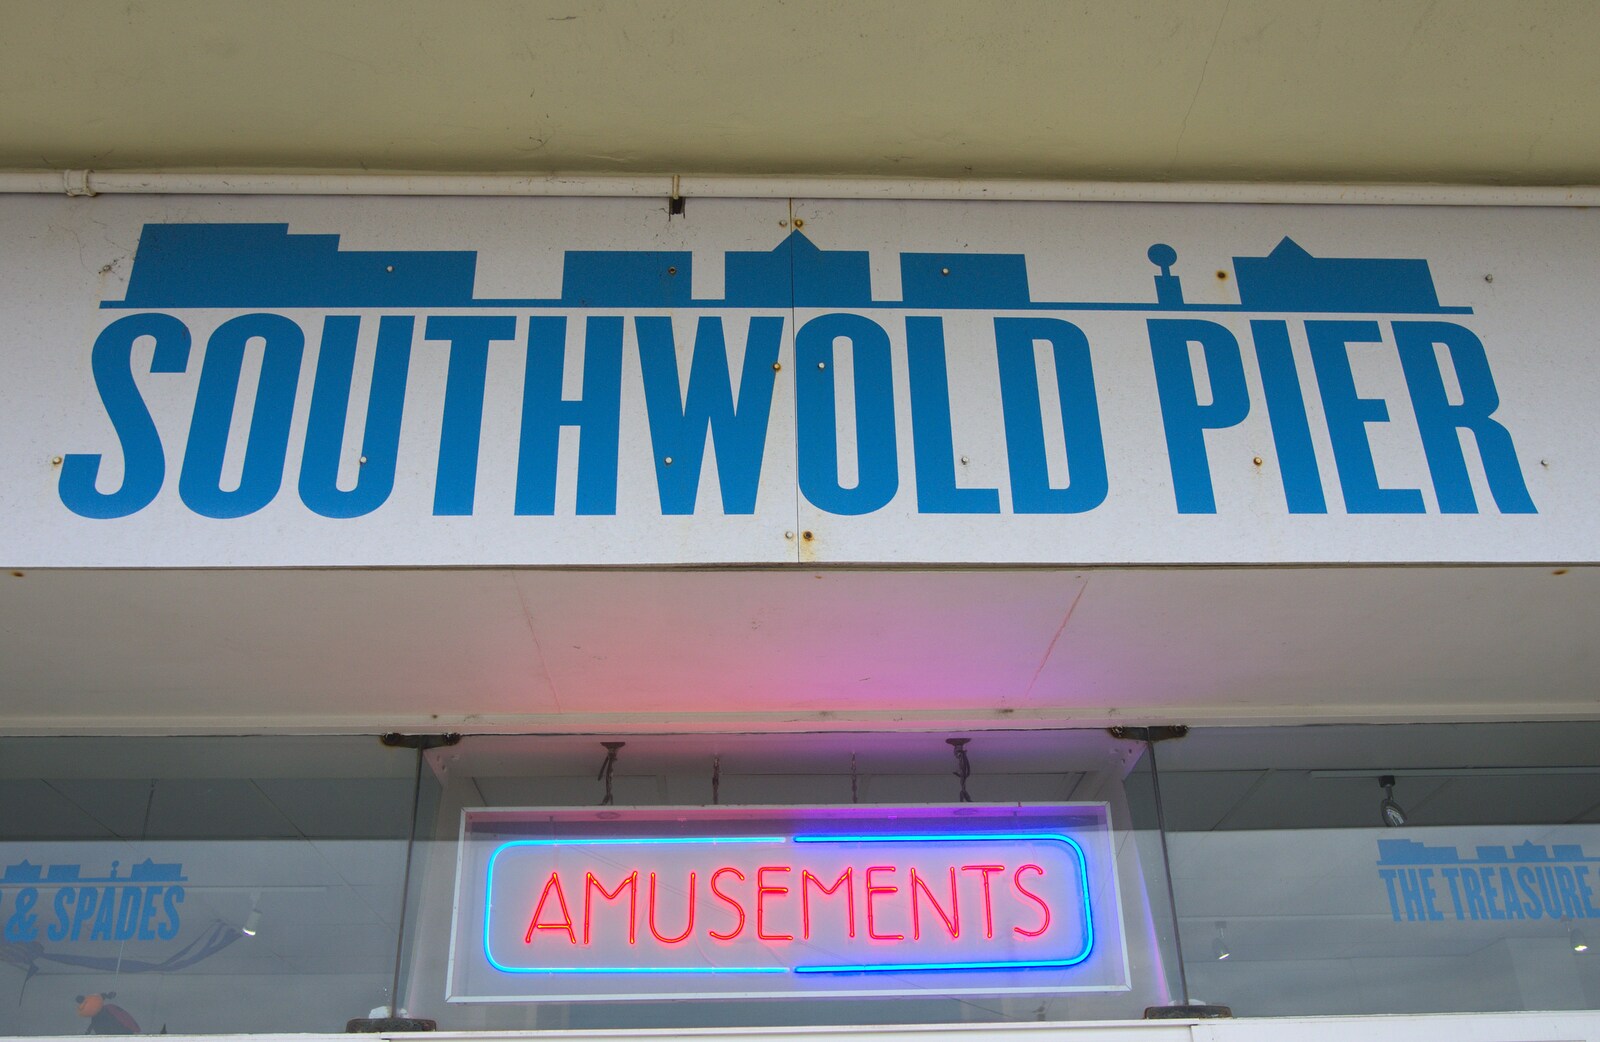 A Southwold Pier sign from A Boxing Day Walk, and a Trip to the Beach, Thornham and Southwold, Suffolk - 26th December 2011